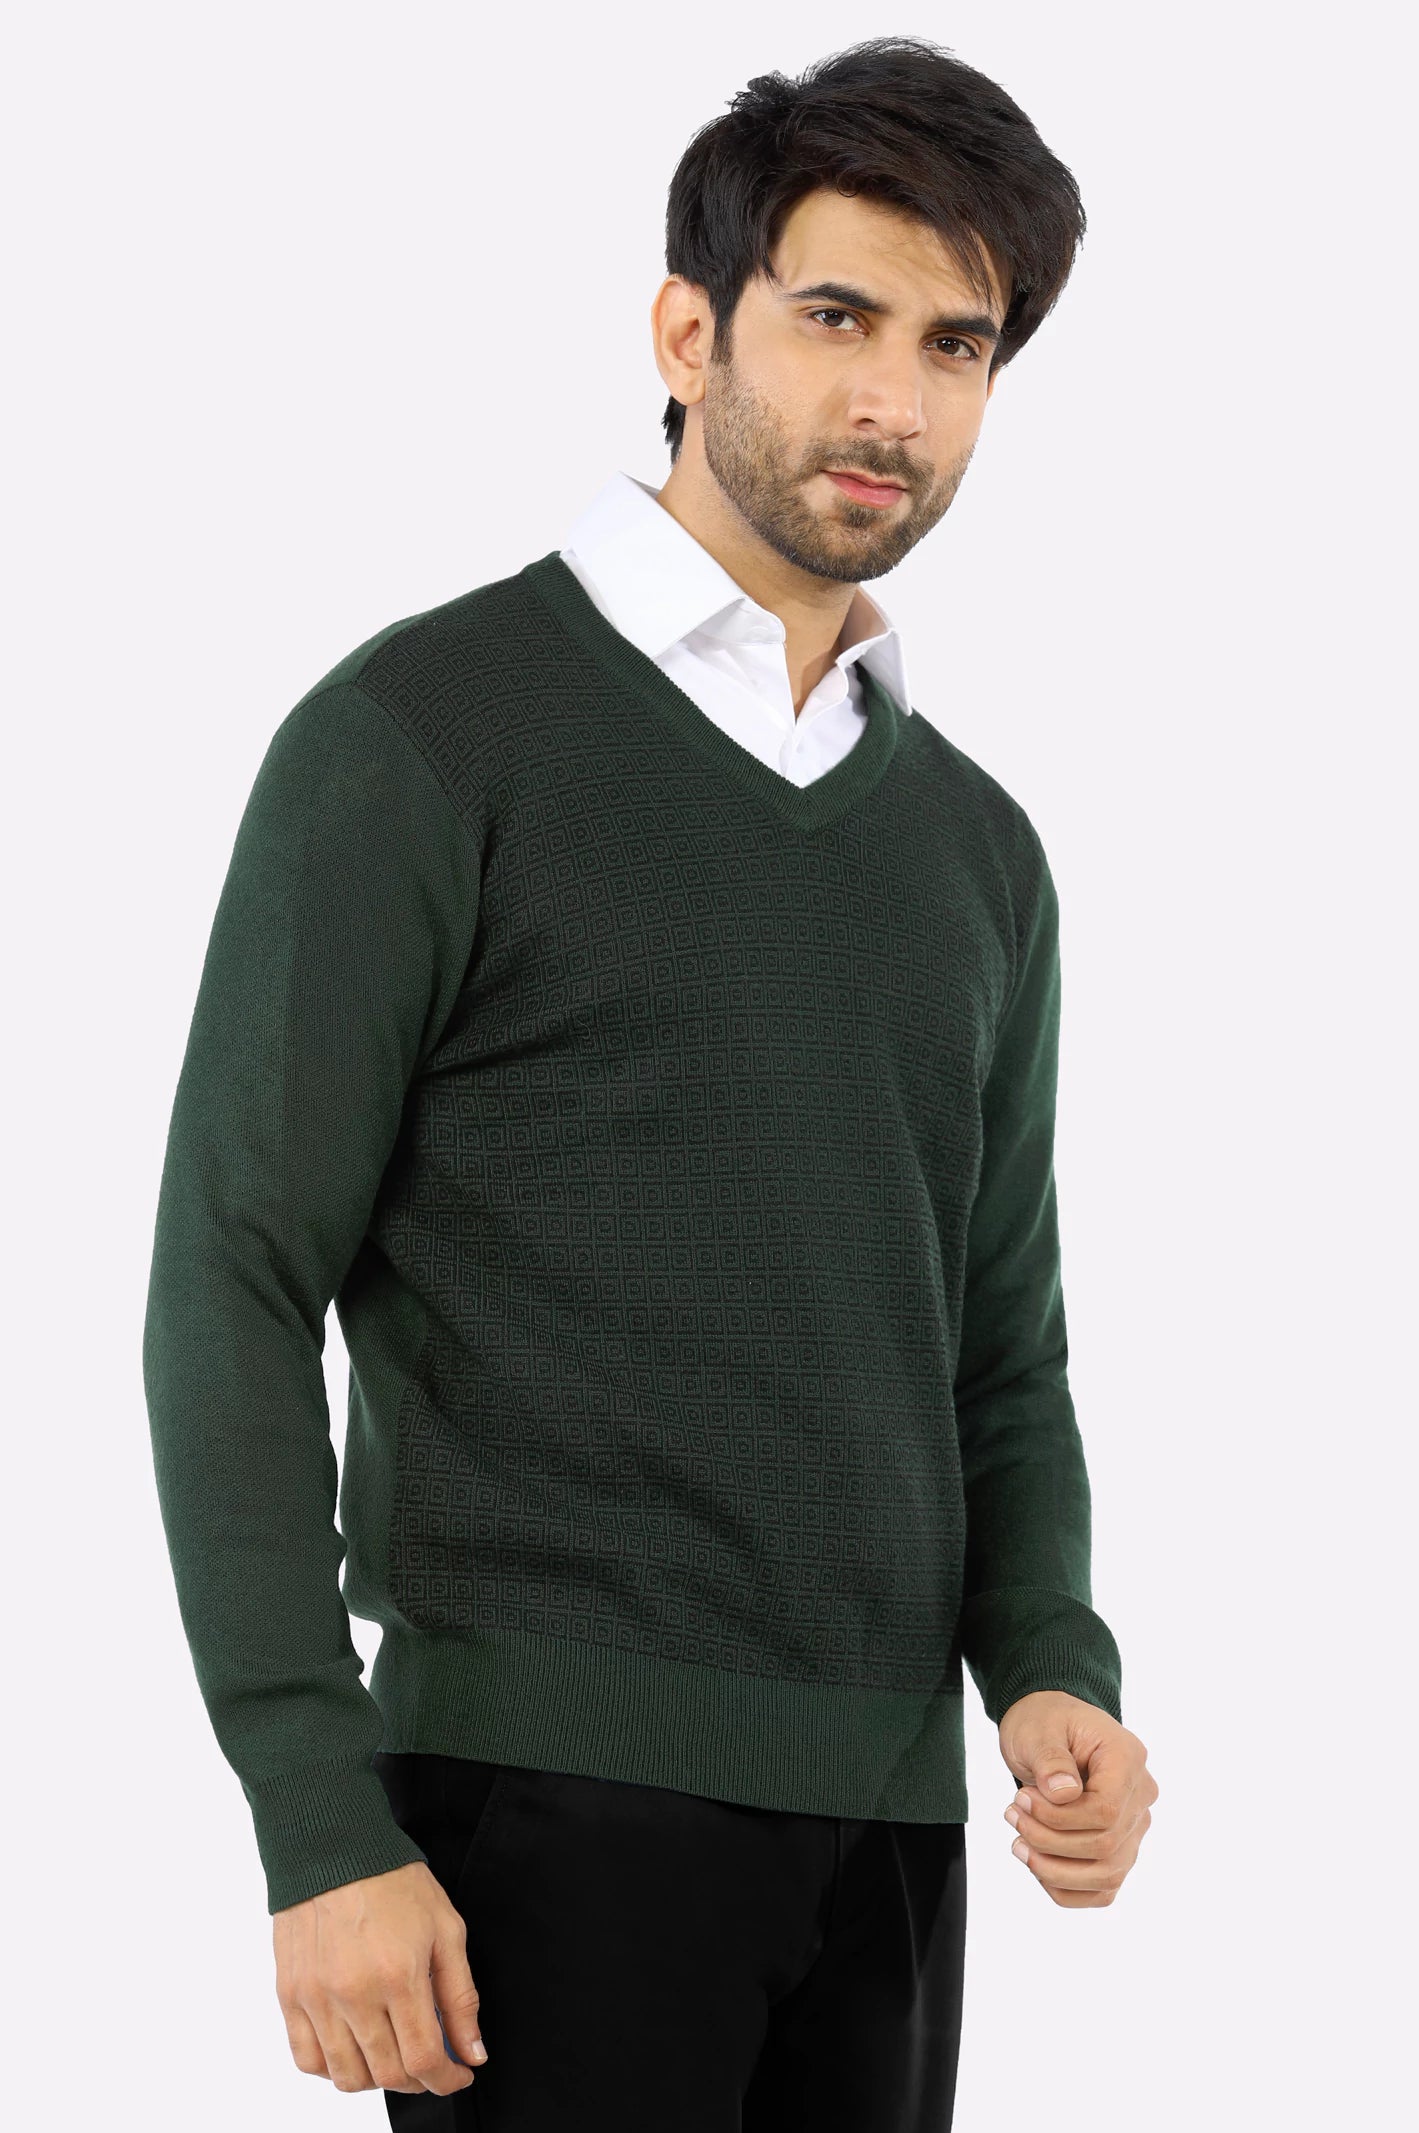 Green V-Neck Gents Sweater From Diners